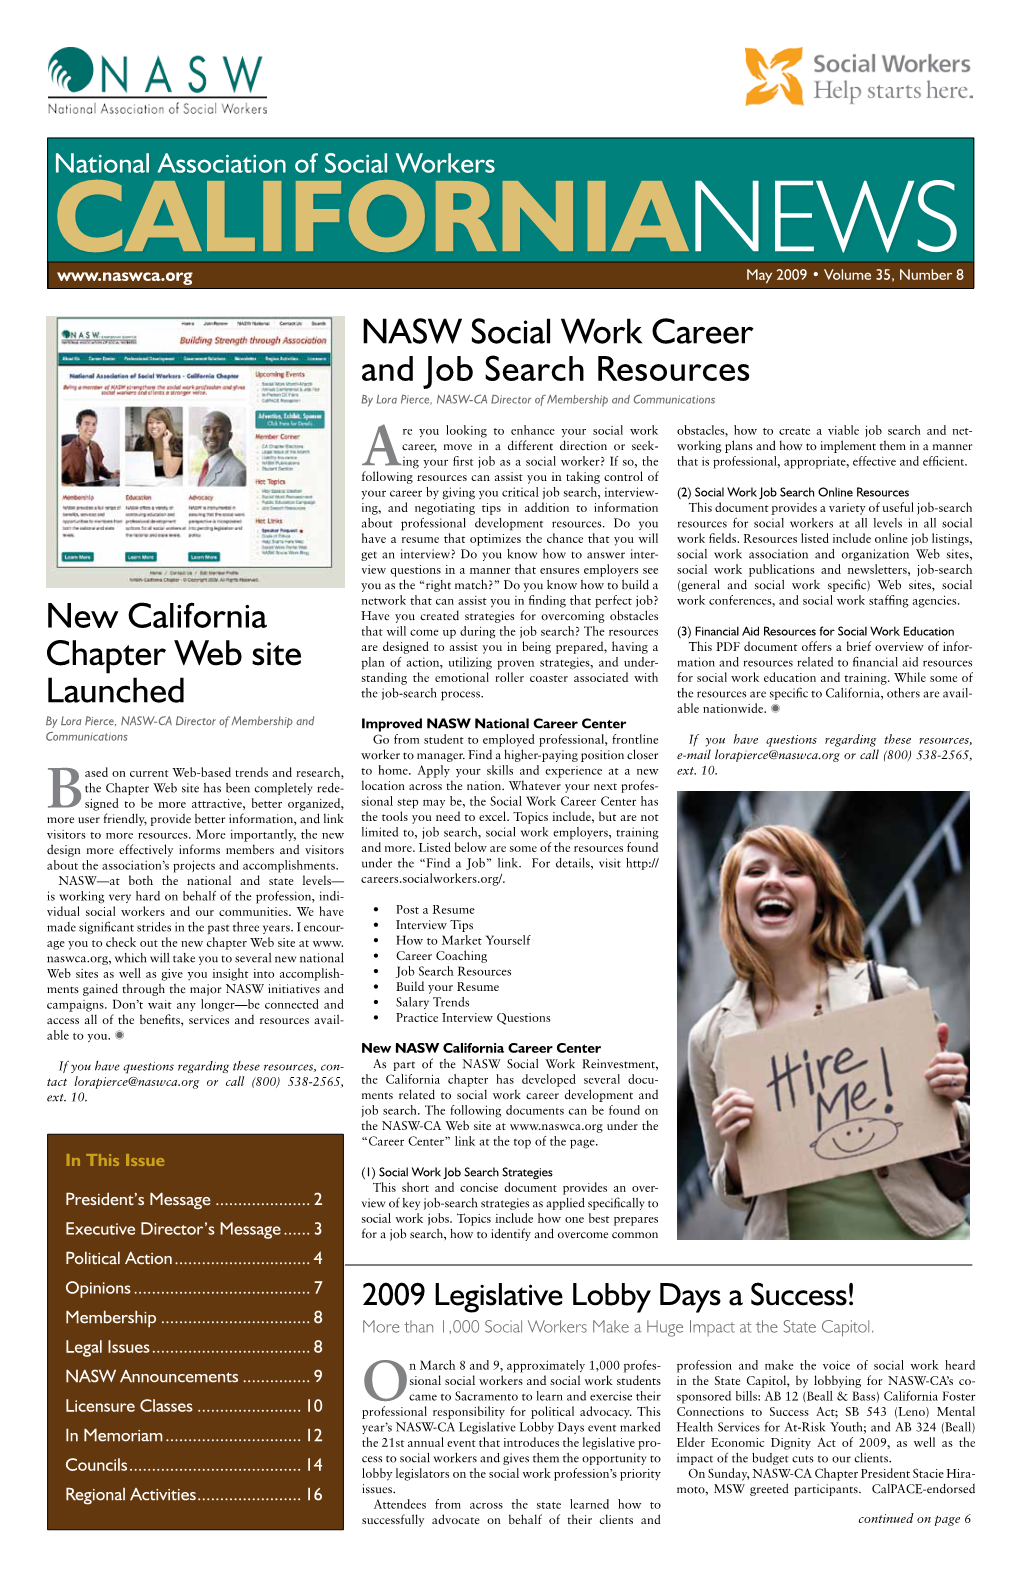 New California Chapter Web Site Launched NASW Social Work